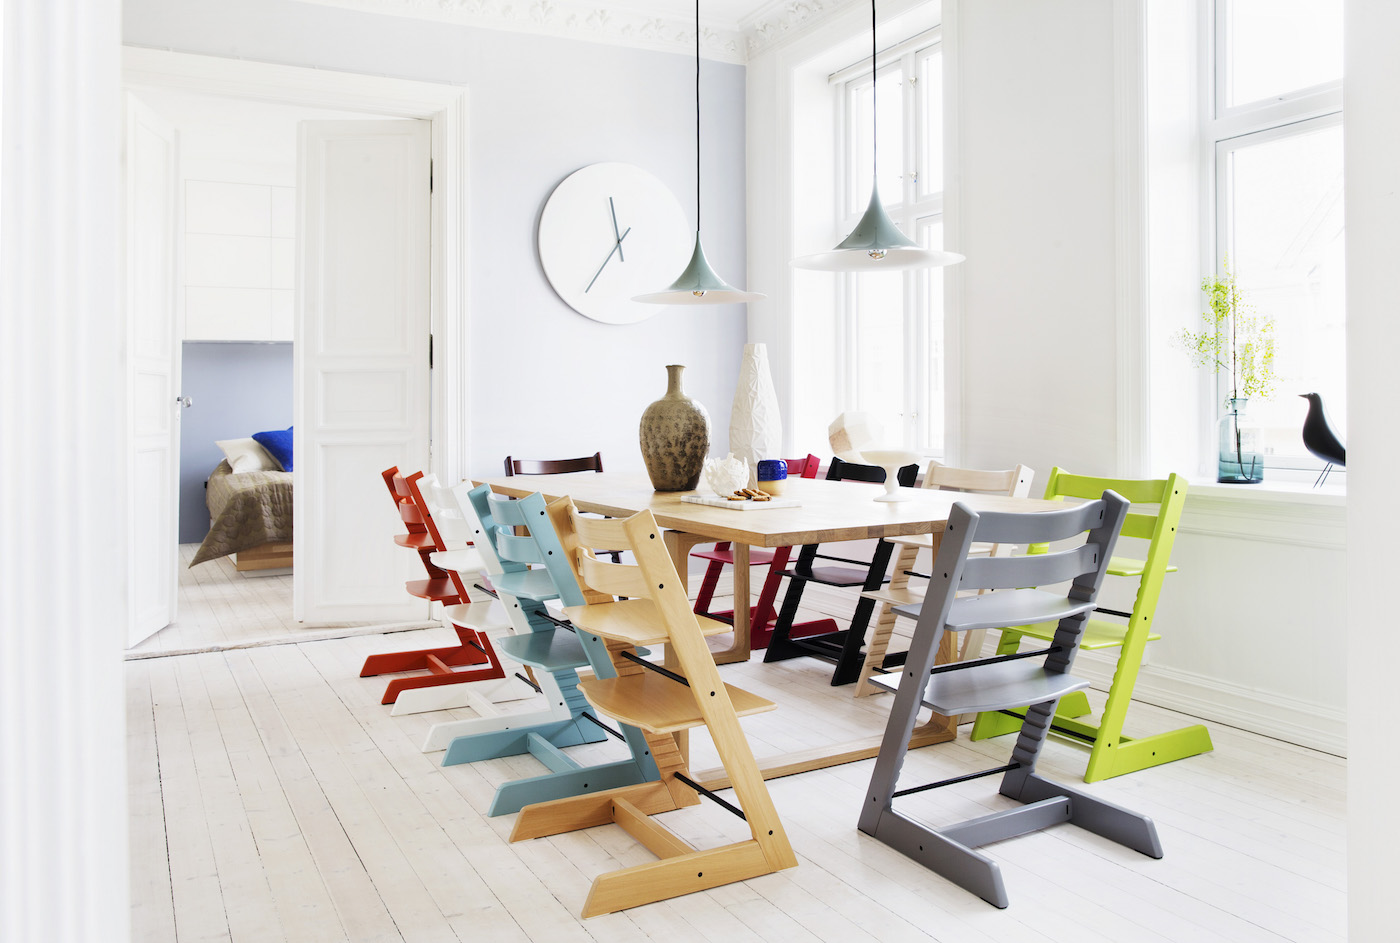 The History of the Tripp Trapp Chair, Which Changed the Children's